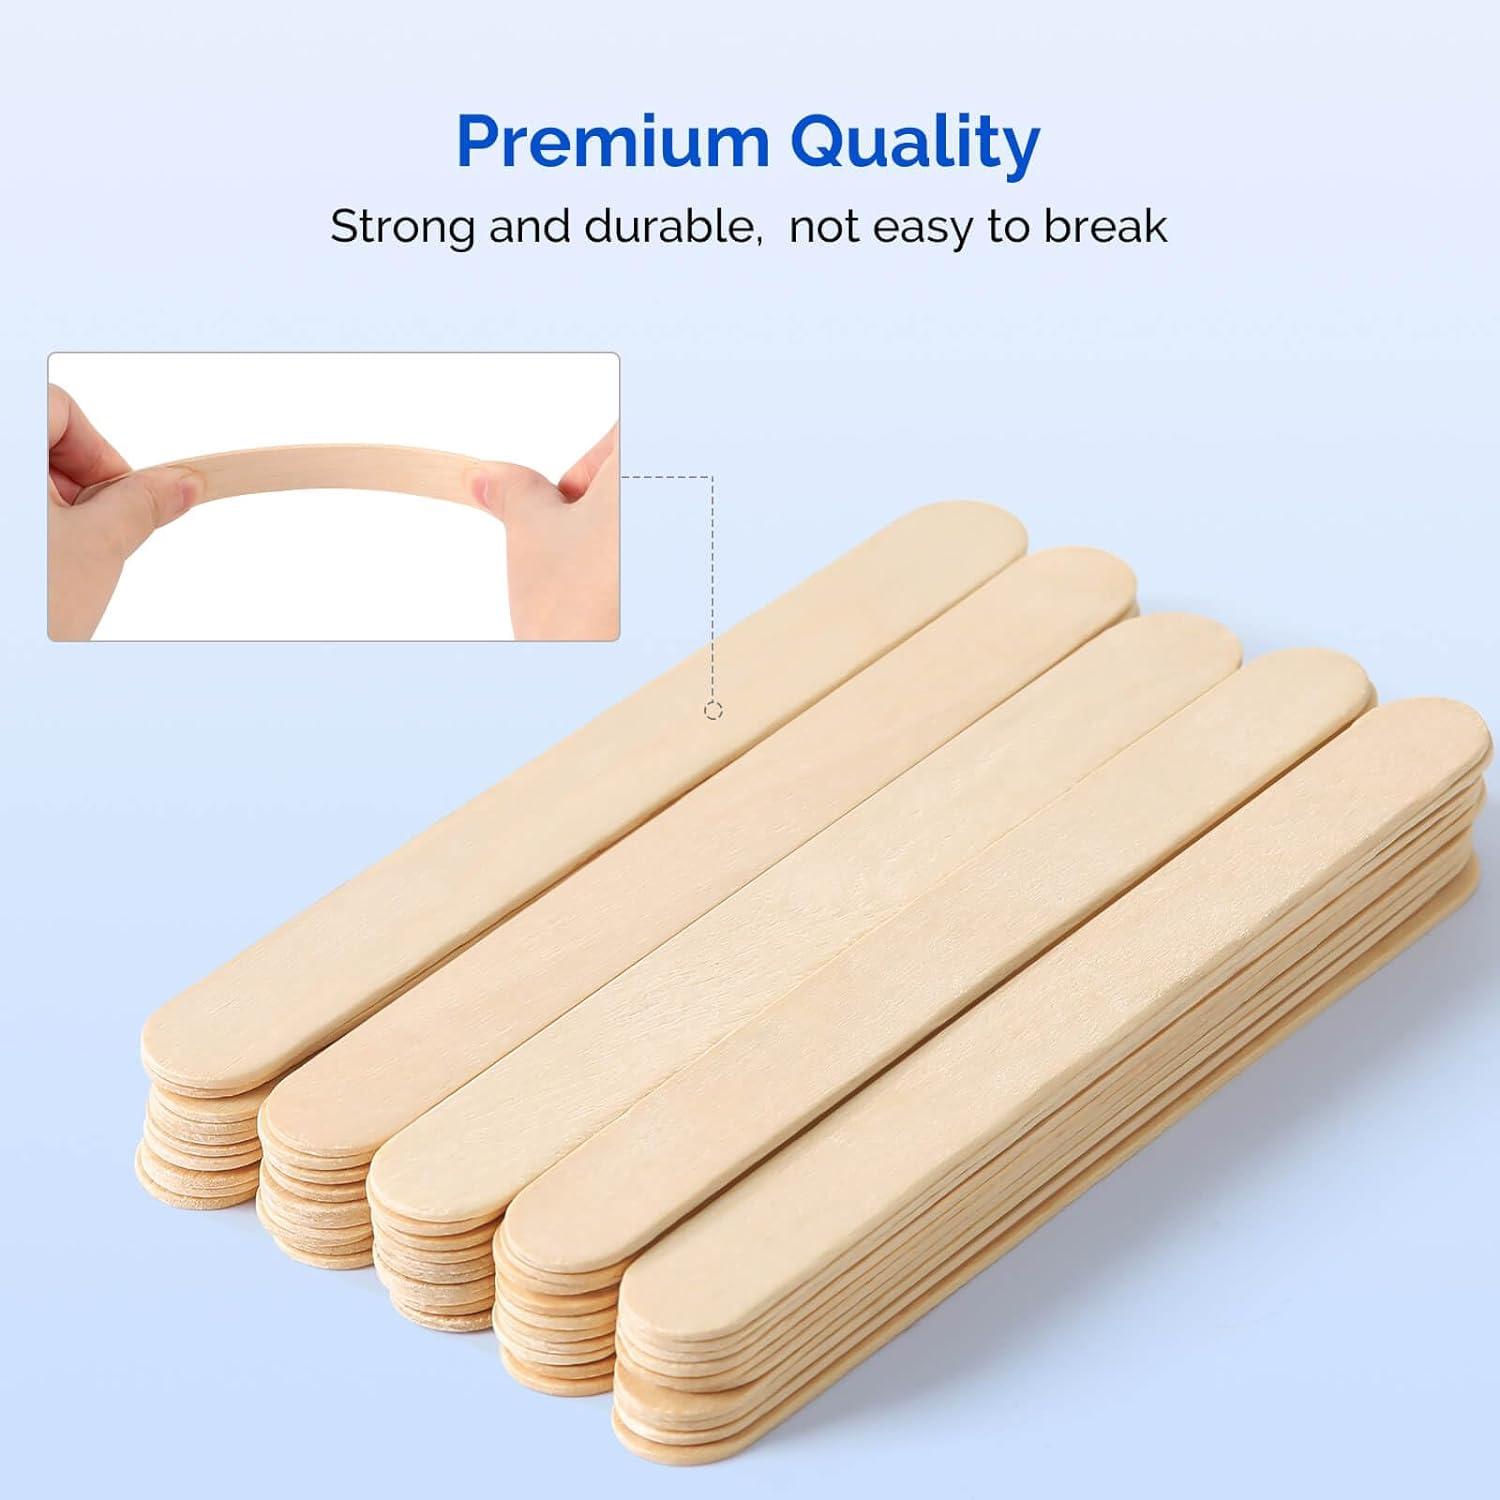  JMU Tongue Depressors 100pcs, 6 Tongue Blades Wooden  Non-Sterile for Crafts Medical Tattoo Popsicle : Industrial & Scientific